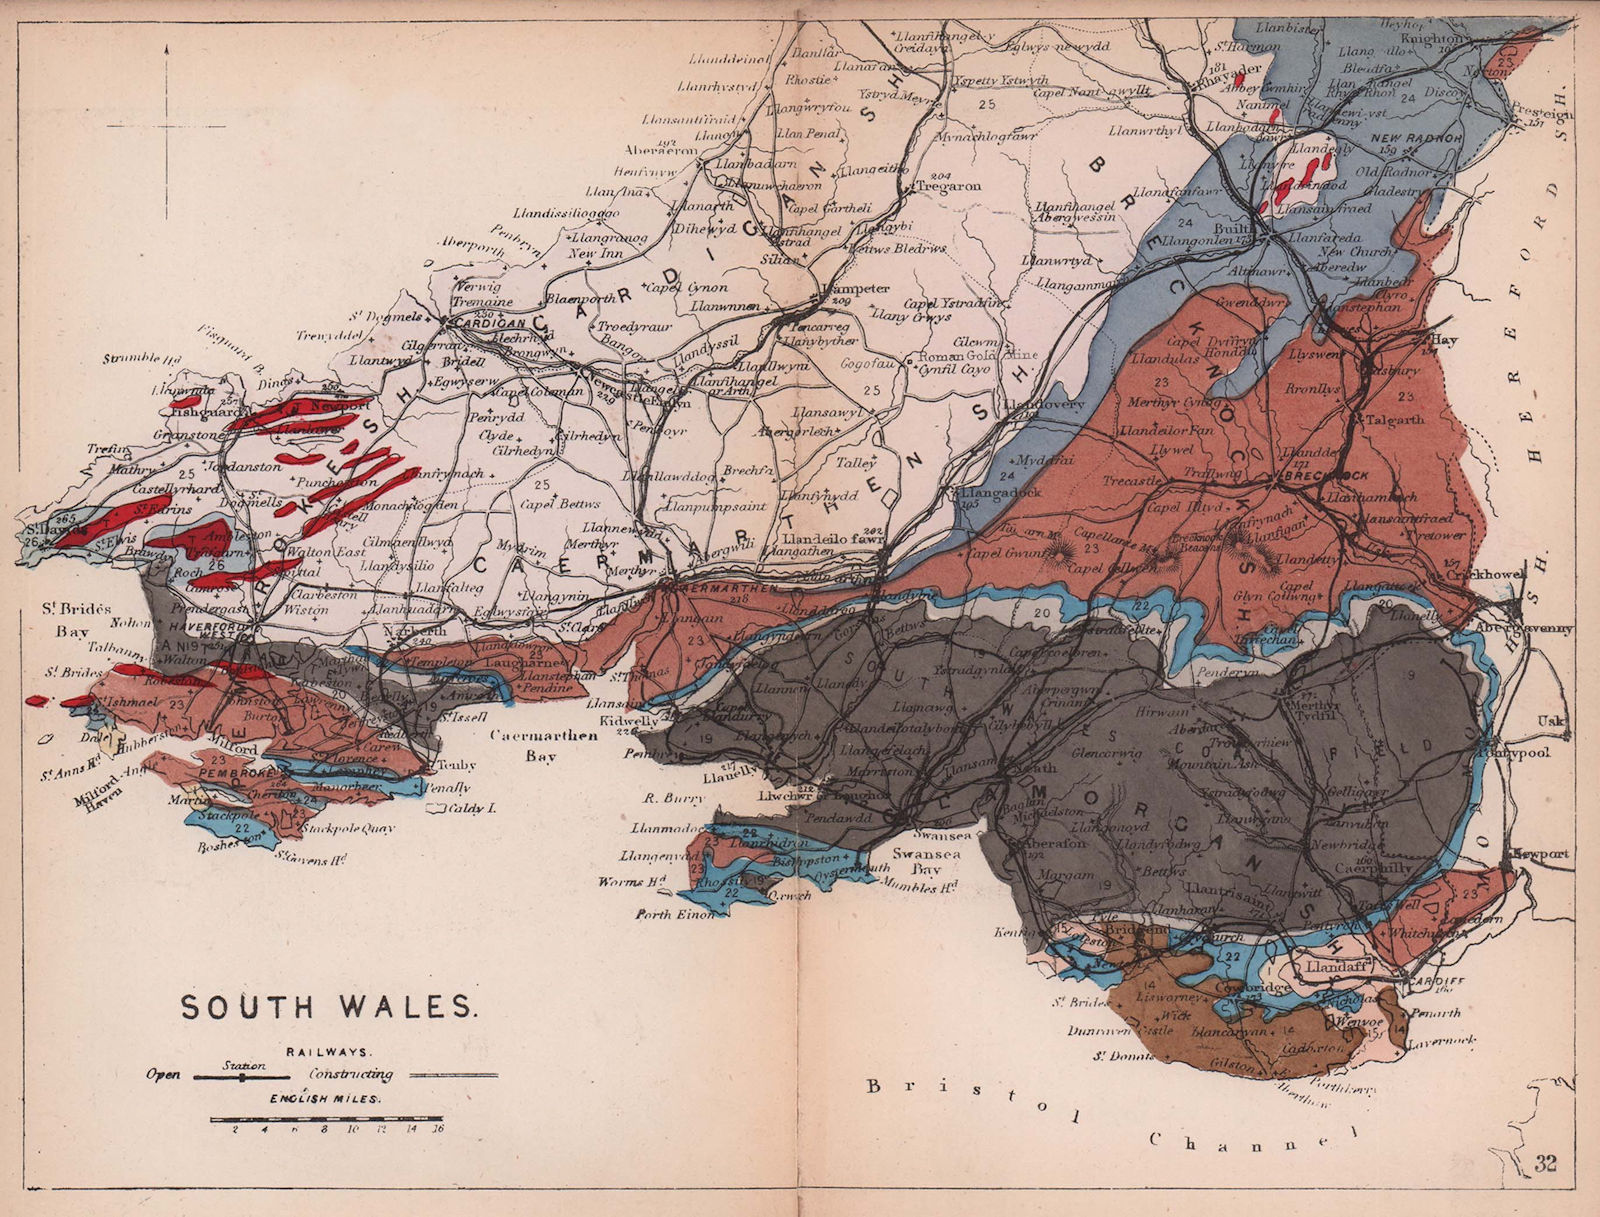 SOUTH WALES antique geological map by James Reynolds 1864